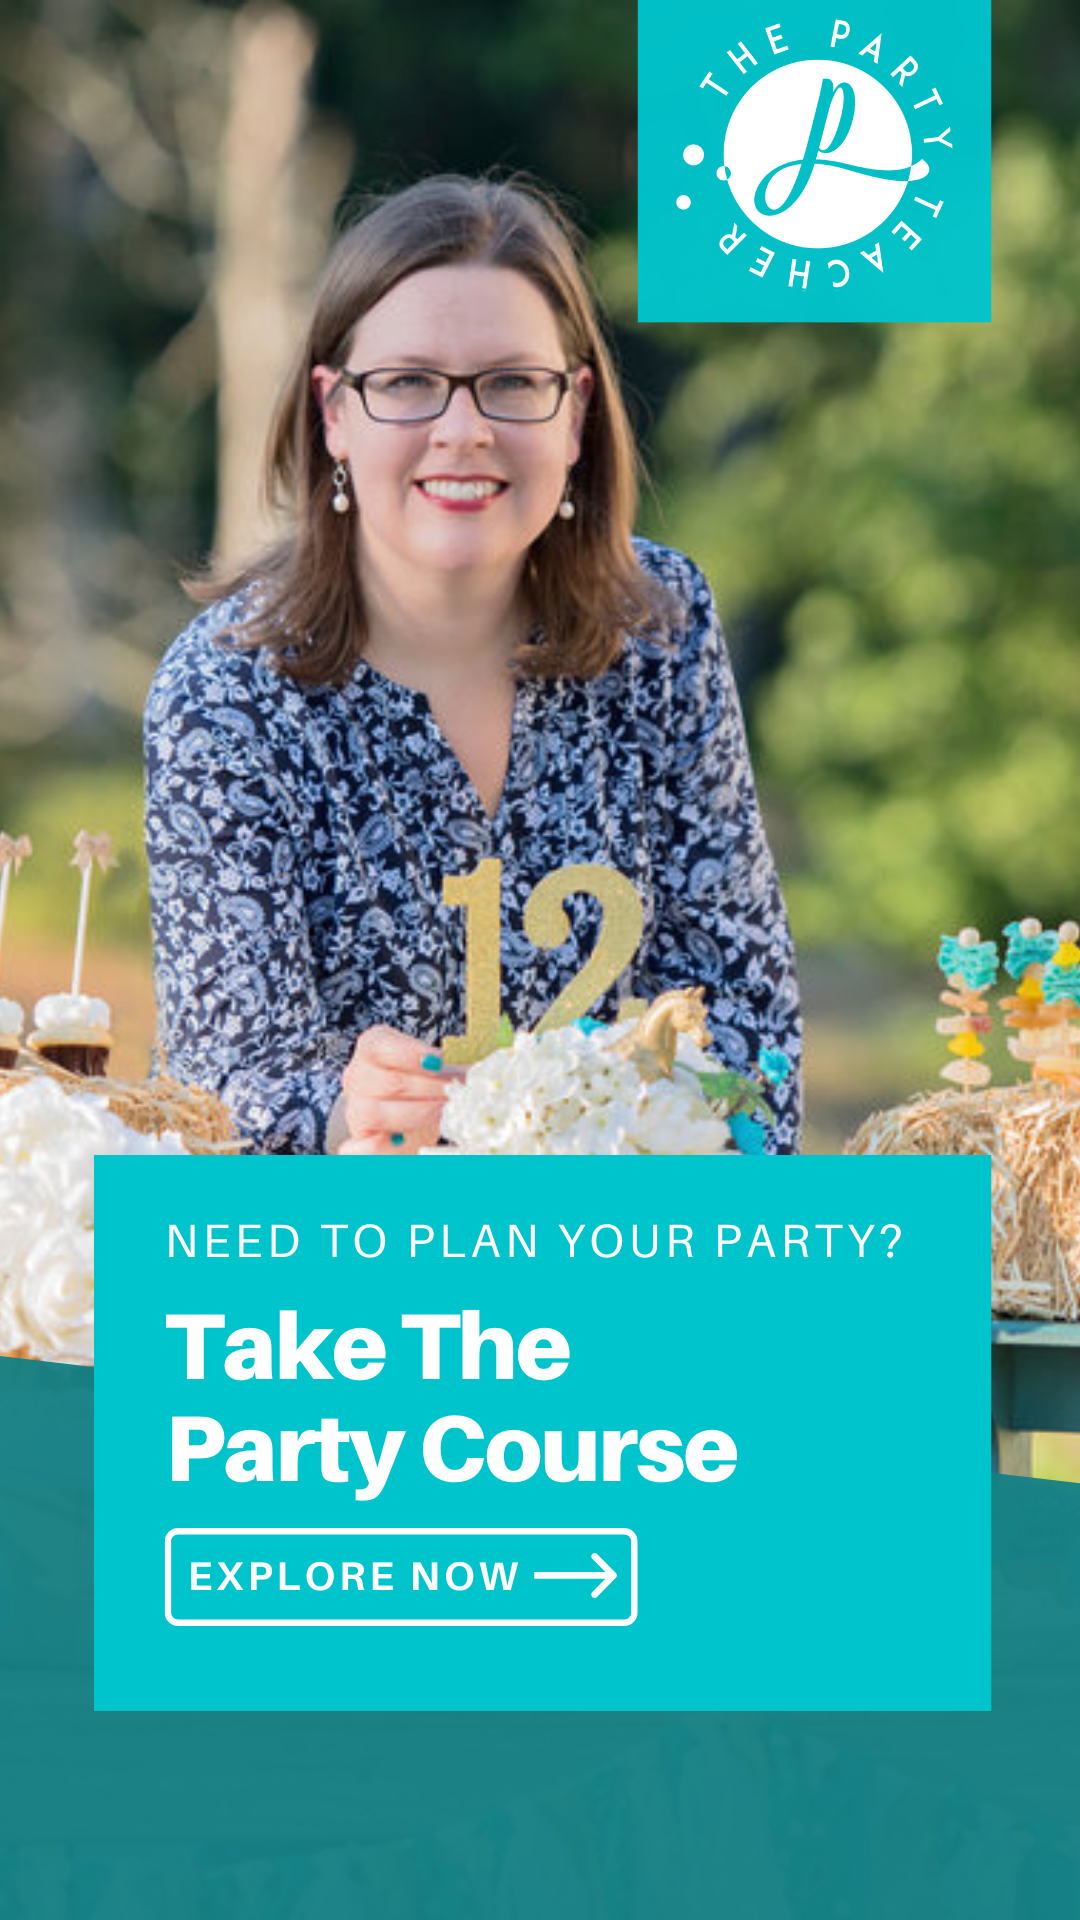 Enroll in The Party Course